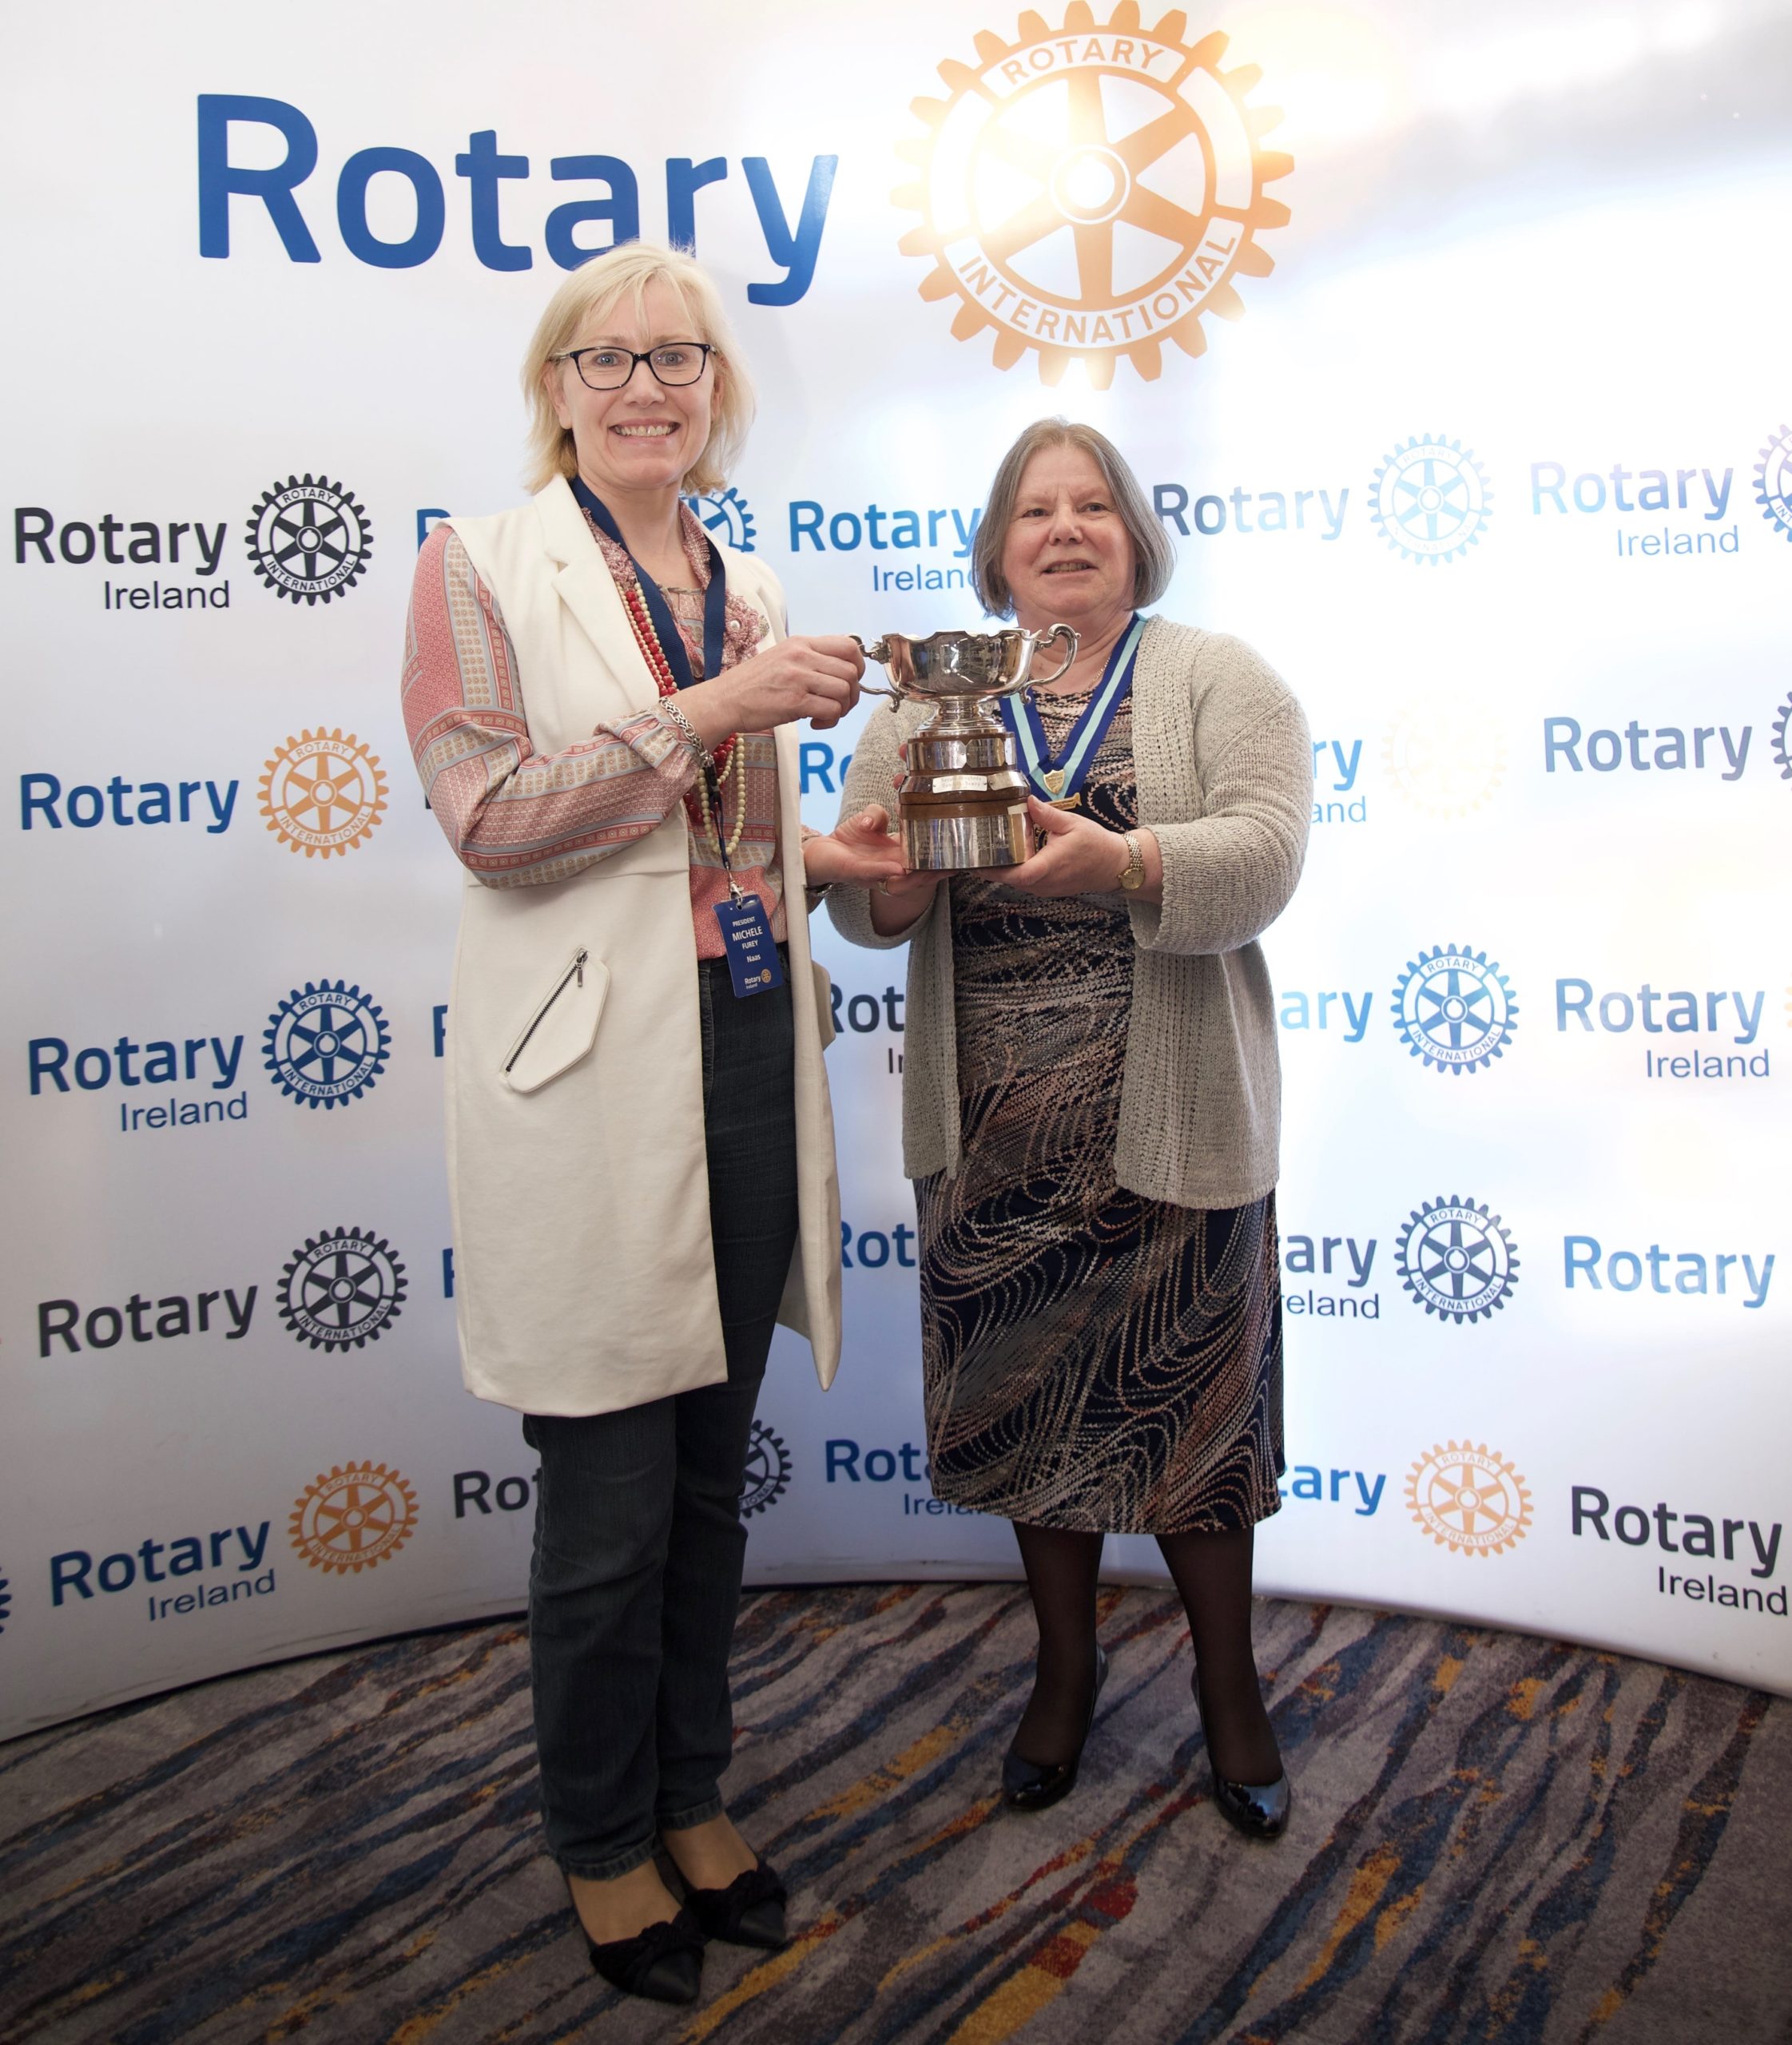 Naas Rotary Club received a District Award